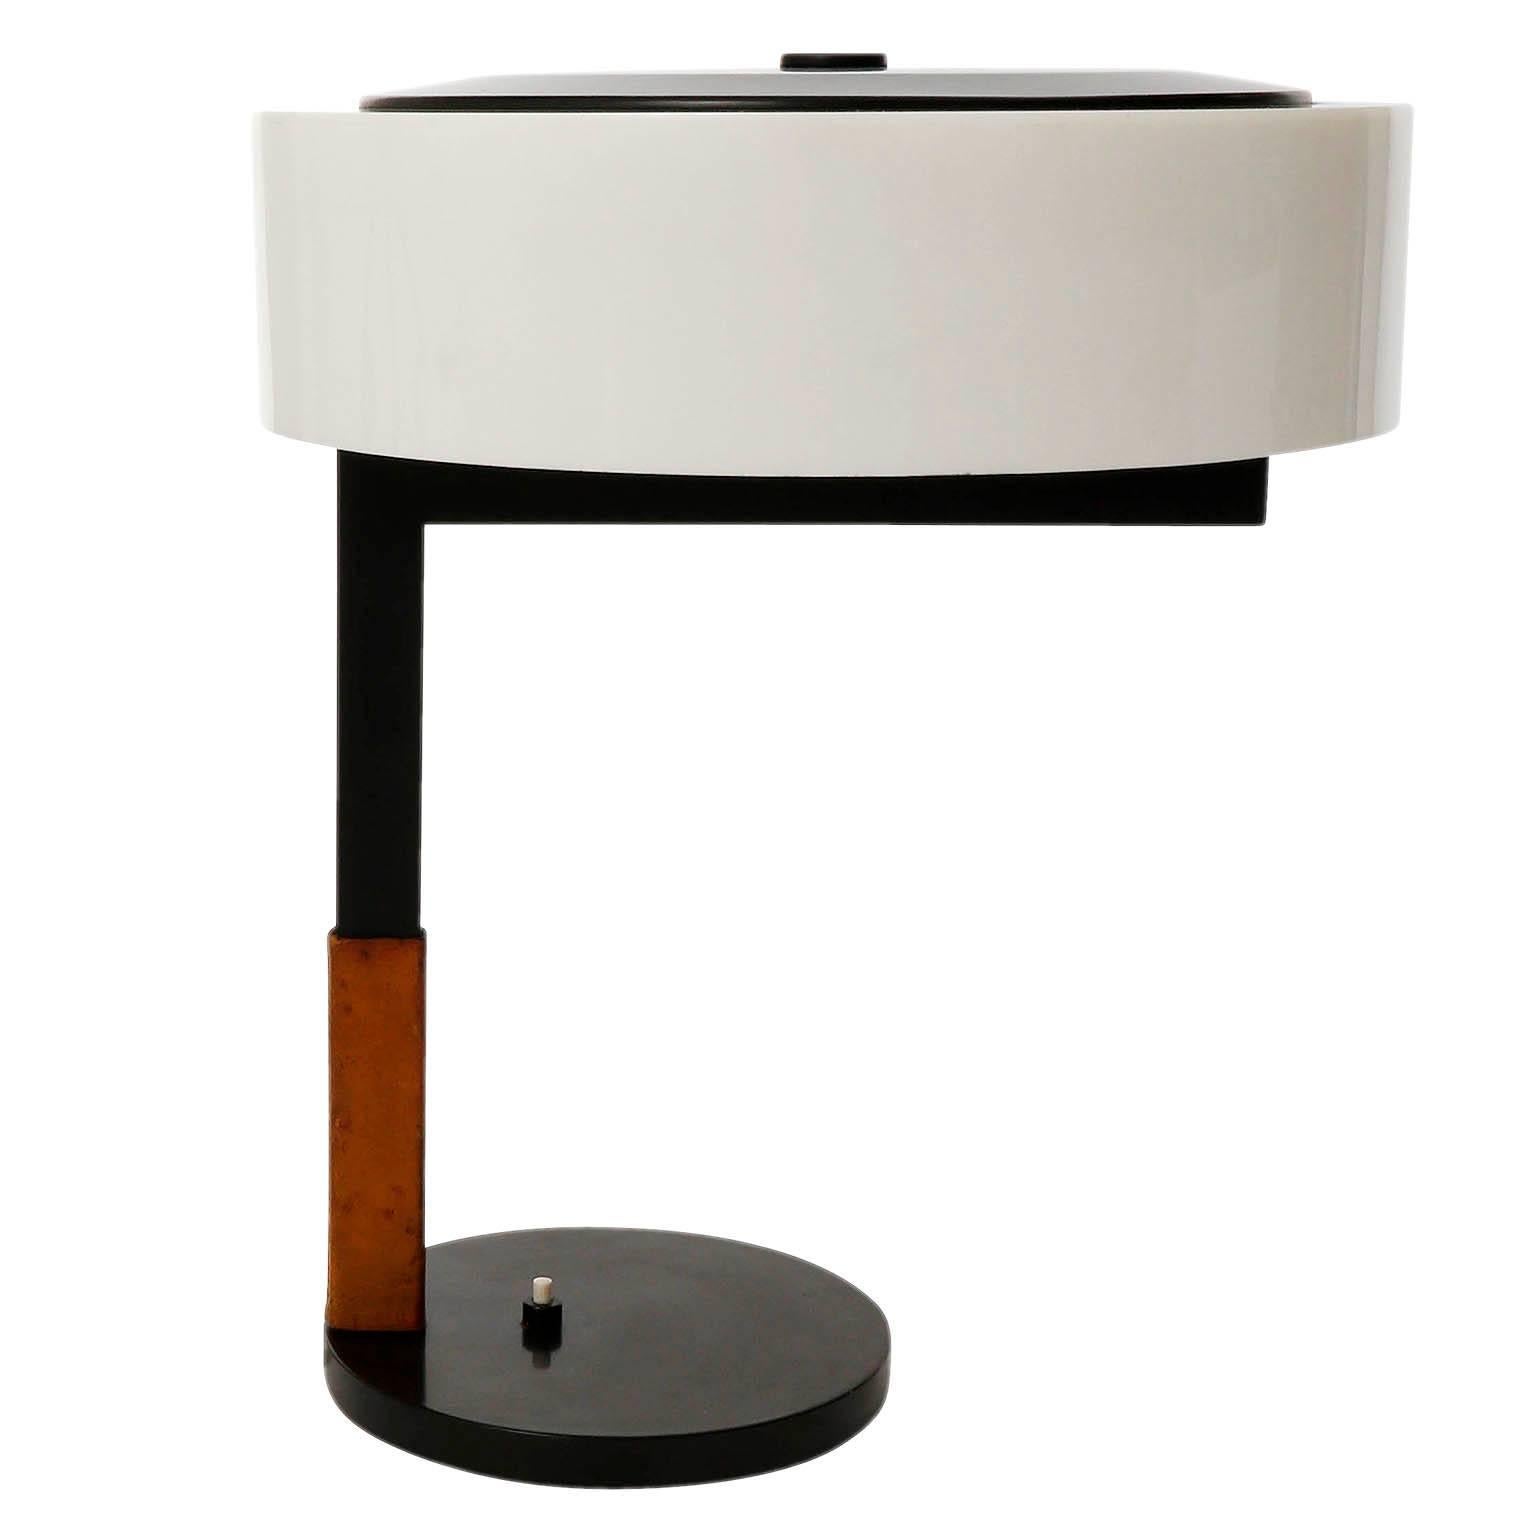 One of two table or desk lights model 'ASSISTENT' (no. 1277) by J.T. Kalmar, Austria, manufactured in Mid-Century in the late 60s.
They are made of a blackened iron stand with a brown leather handle. The swiveling lampshade is made of an opal white